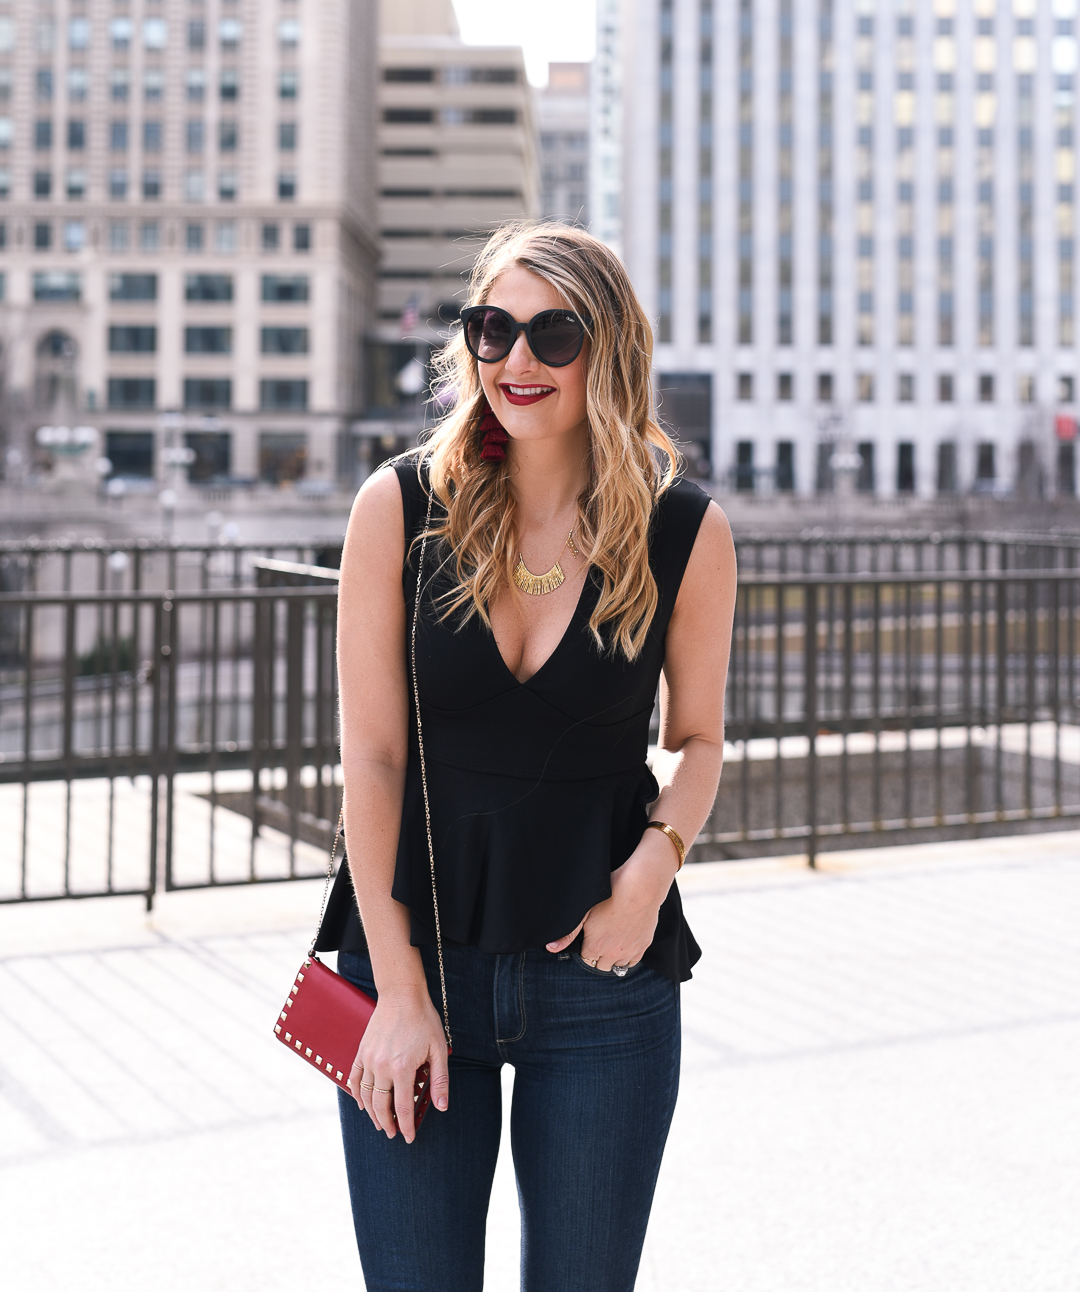 Best date night top outfit - 5 Valentines Day Outfits by popular Chicago style blogger Visions of Vogue